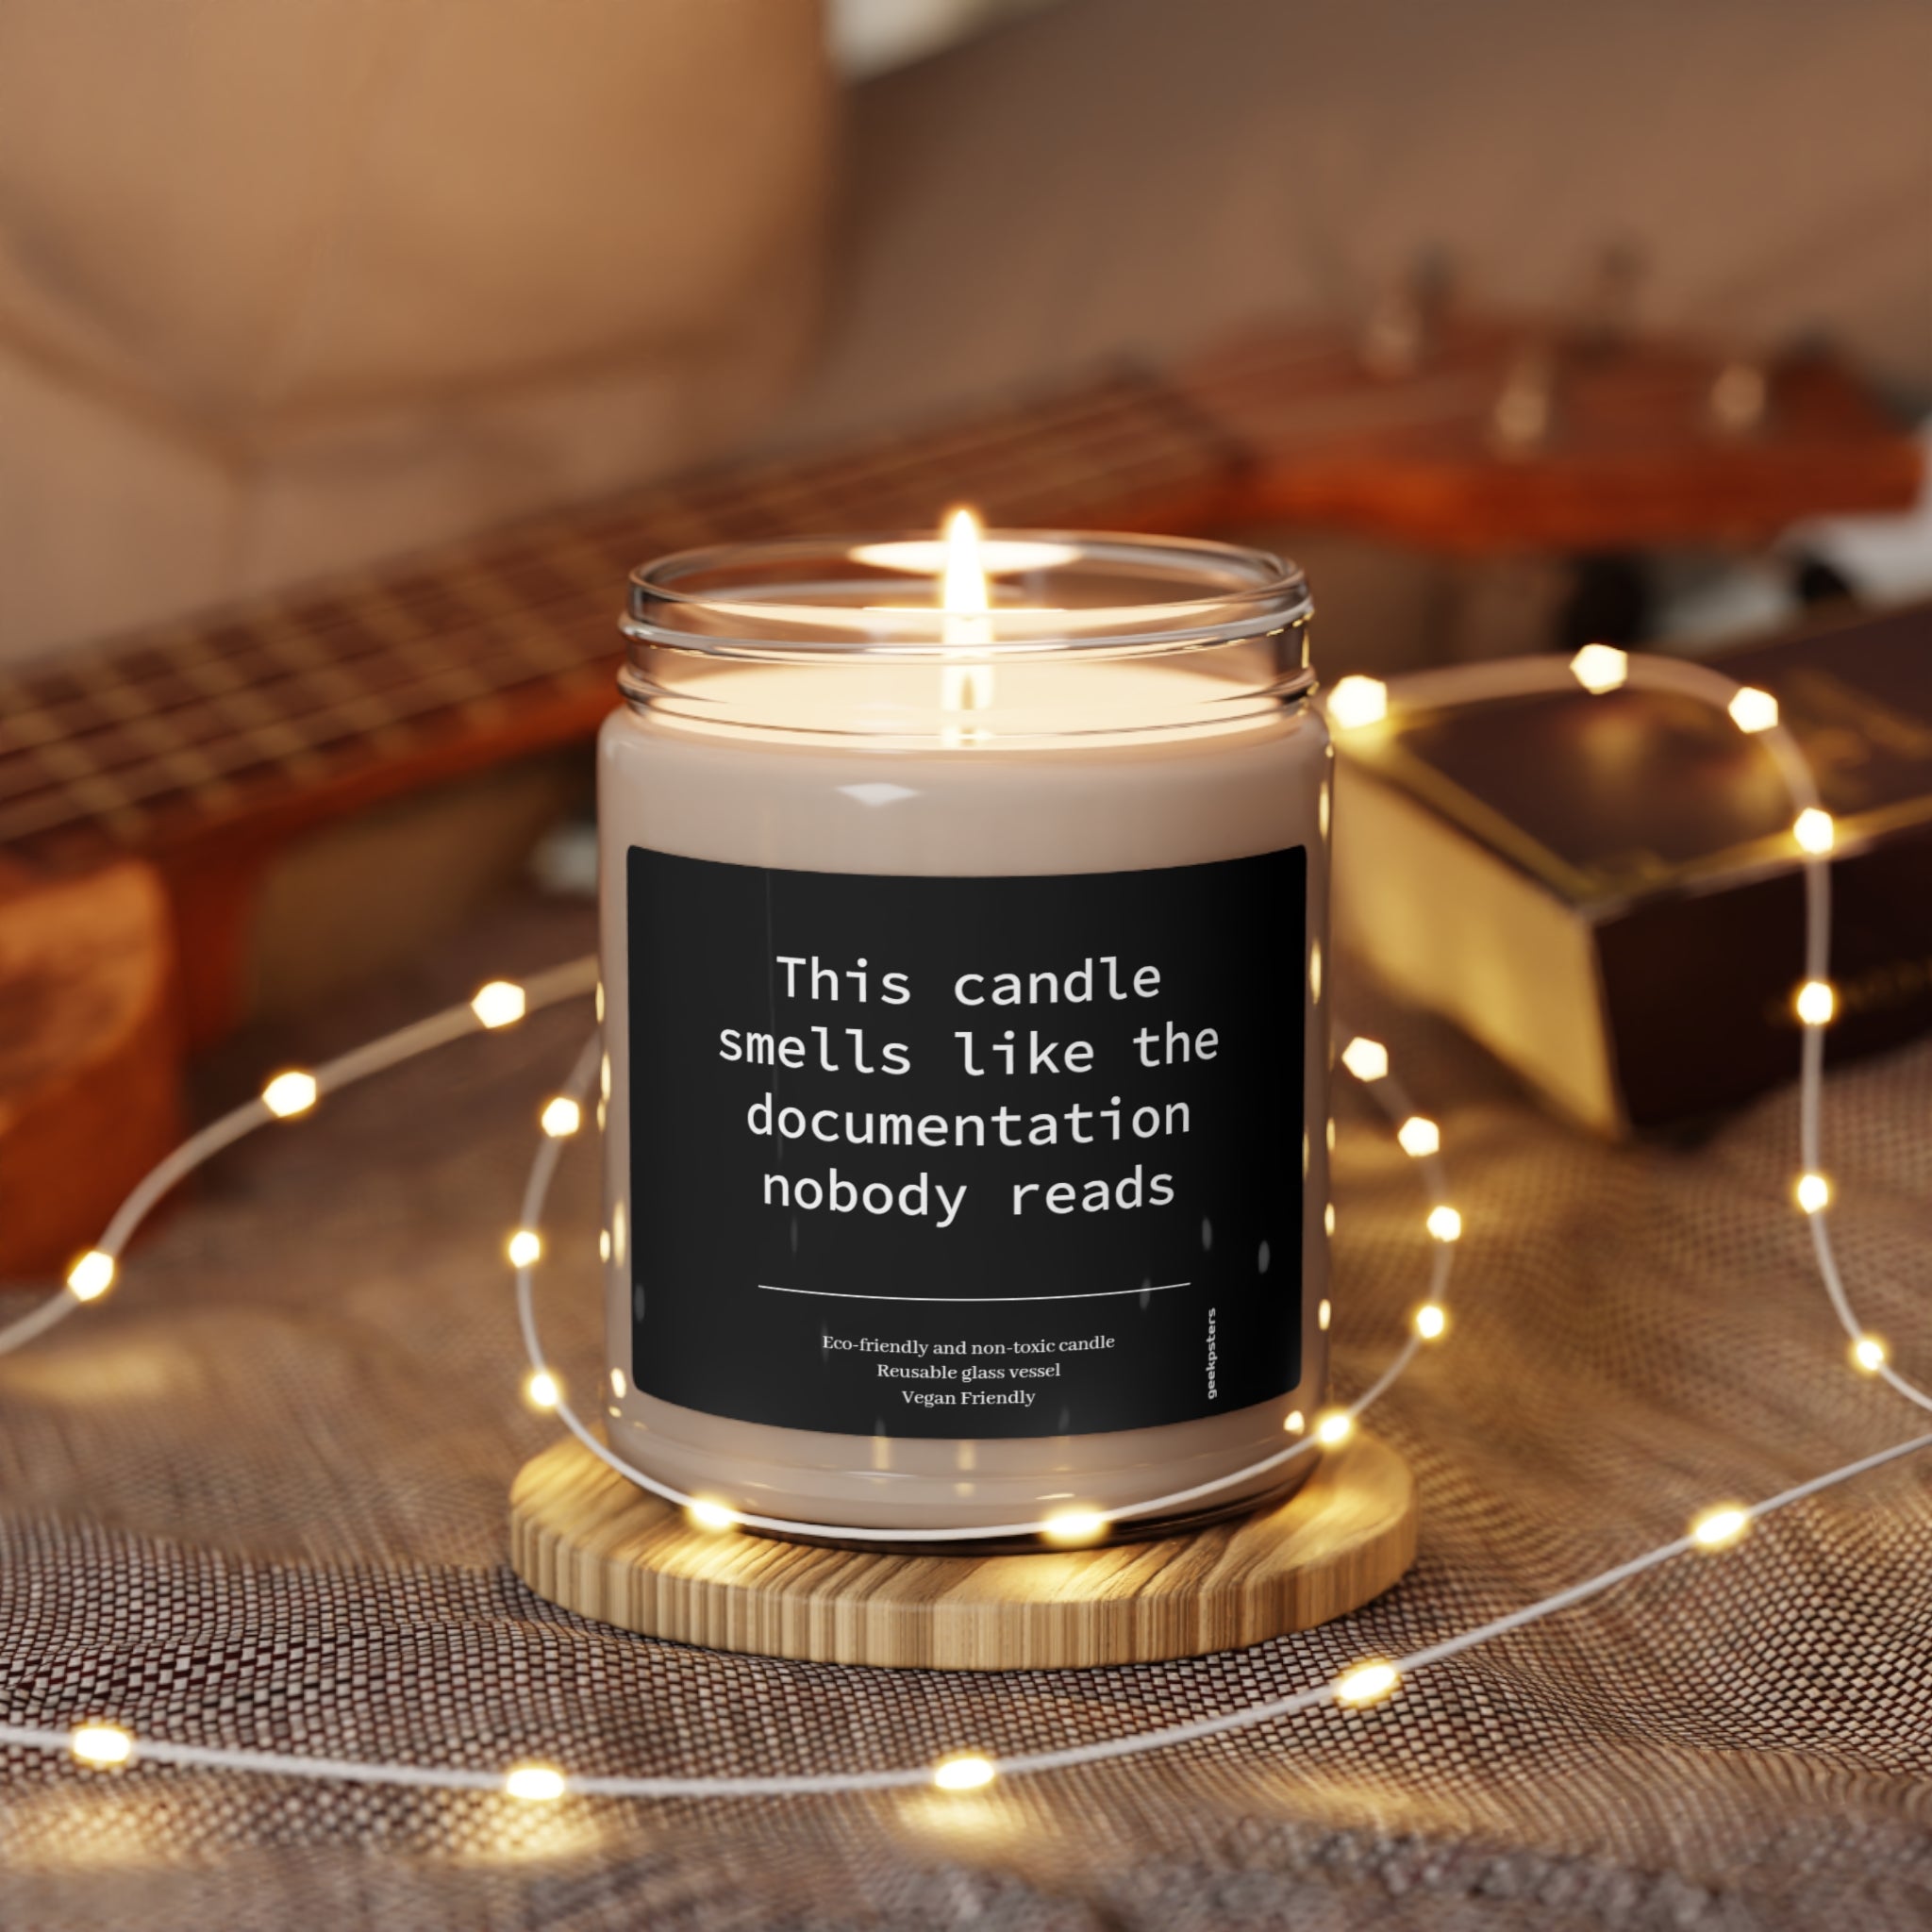 A lit scented candle with a humorous label, made from This Candle Smells Like the Documentation Nobody Reads- Scented Soy Candle, 9oz wax blend, placed on a wooden holder, surrounded by string lights.